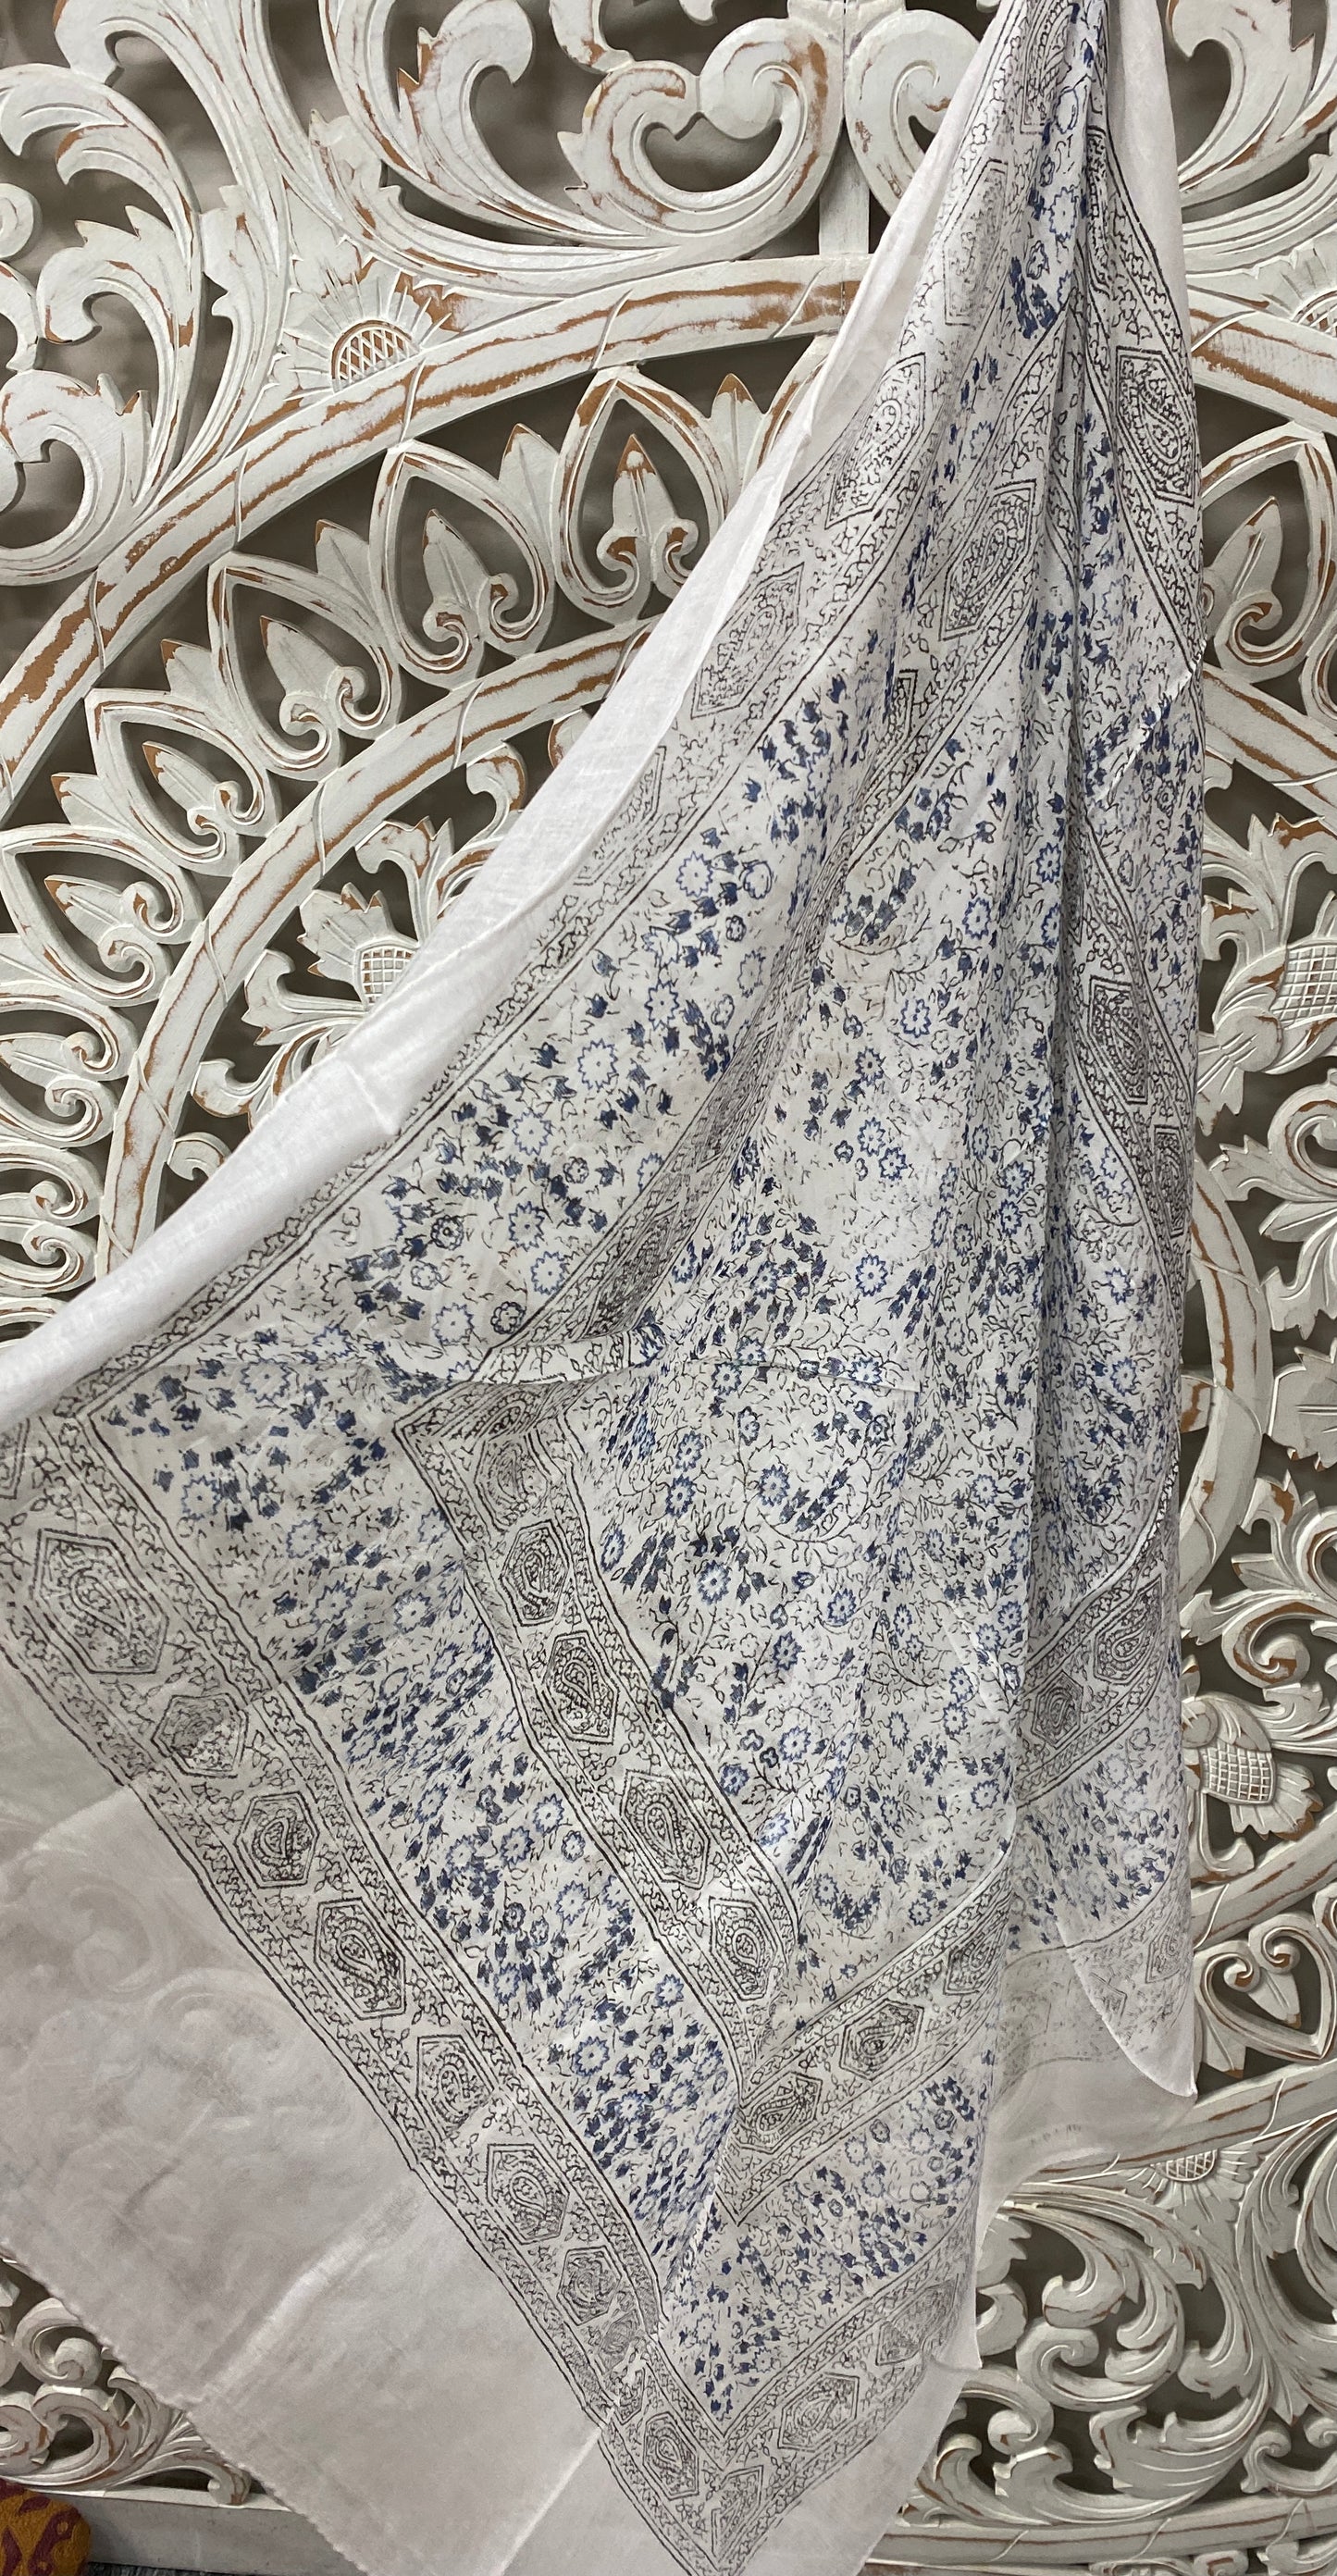 Square Light Weight Cotton Scarves w Paisleys & Flowers - Available in 8 Colors